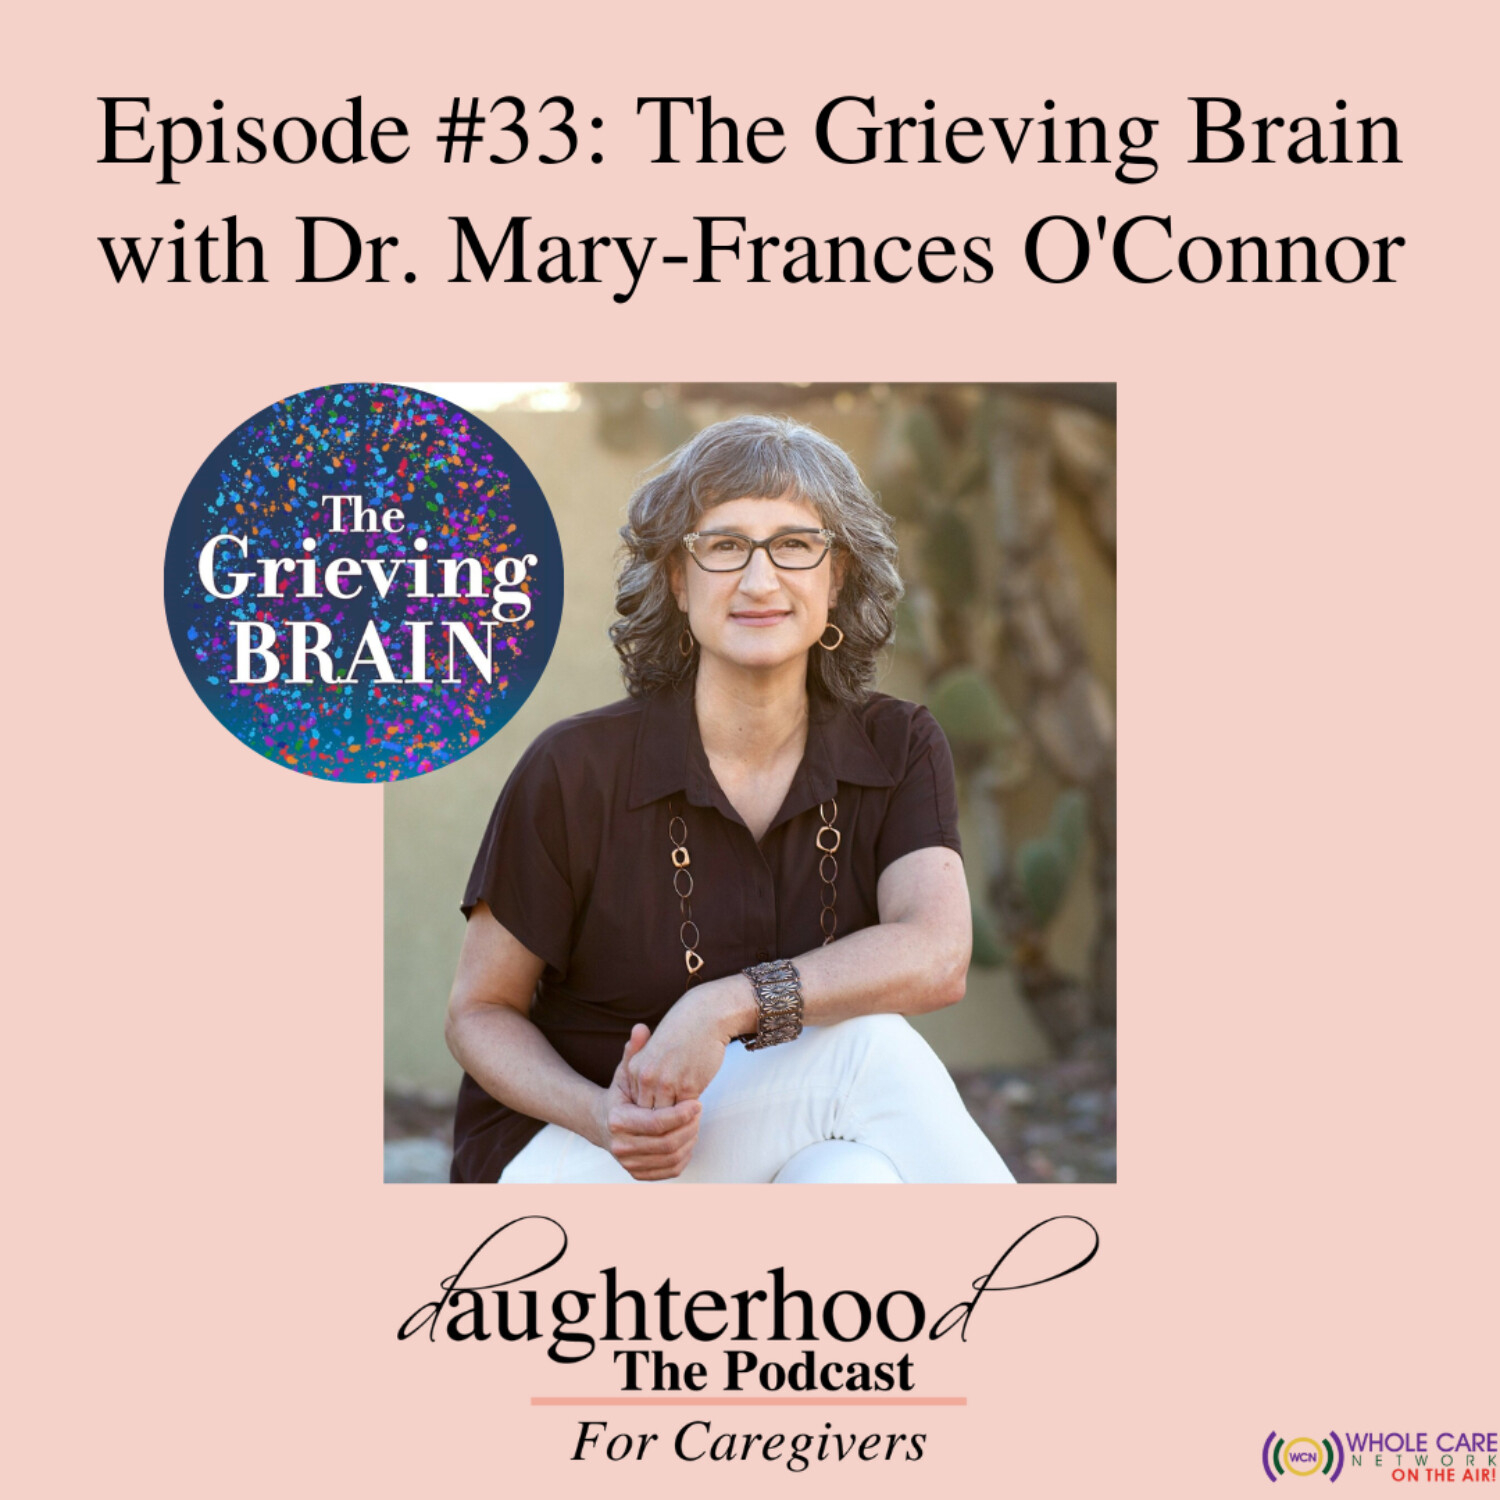 The Grieving Brain with Dr Mary-Frances O’Connor